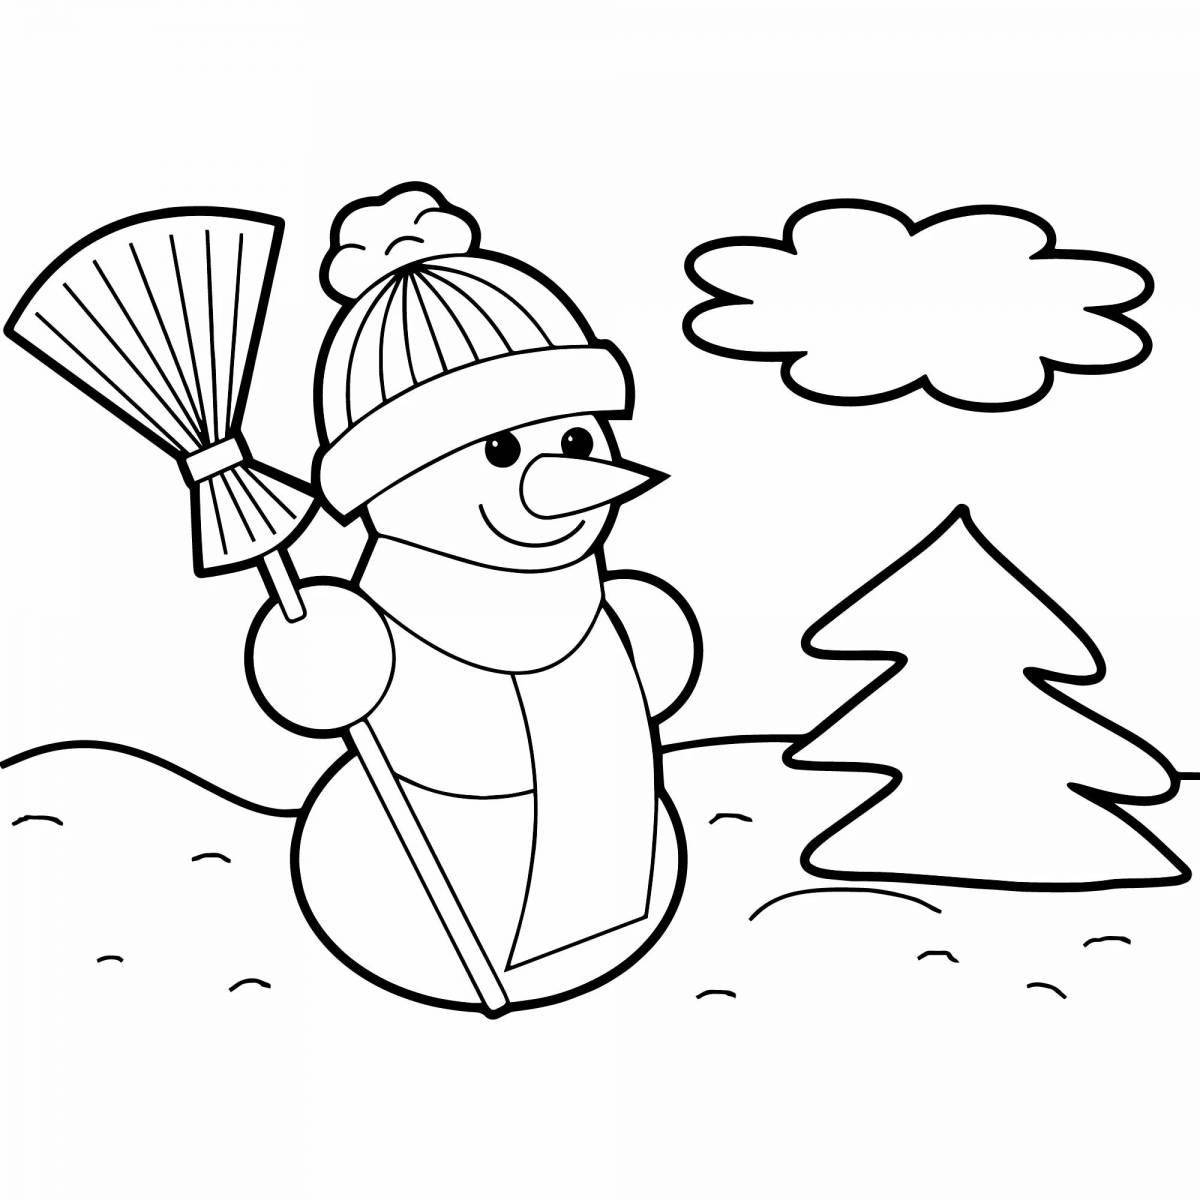 Children's winter coloring book for kids